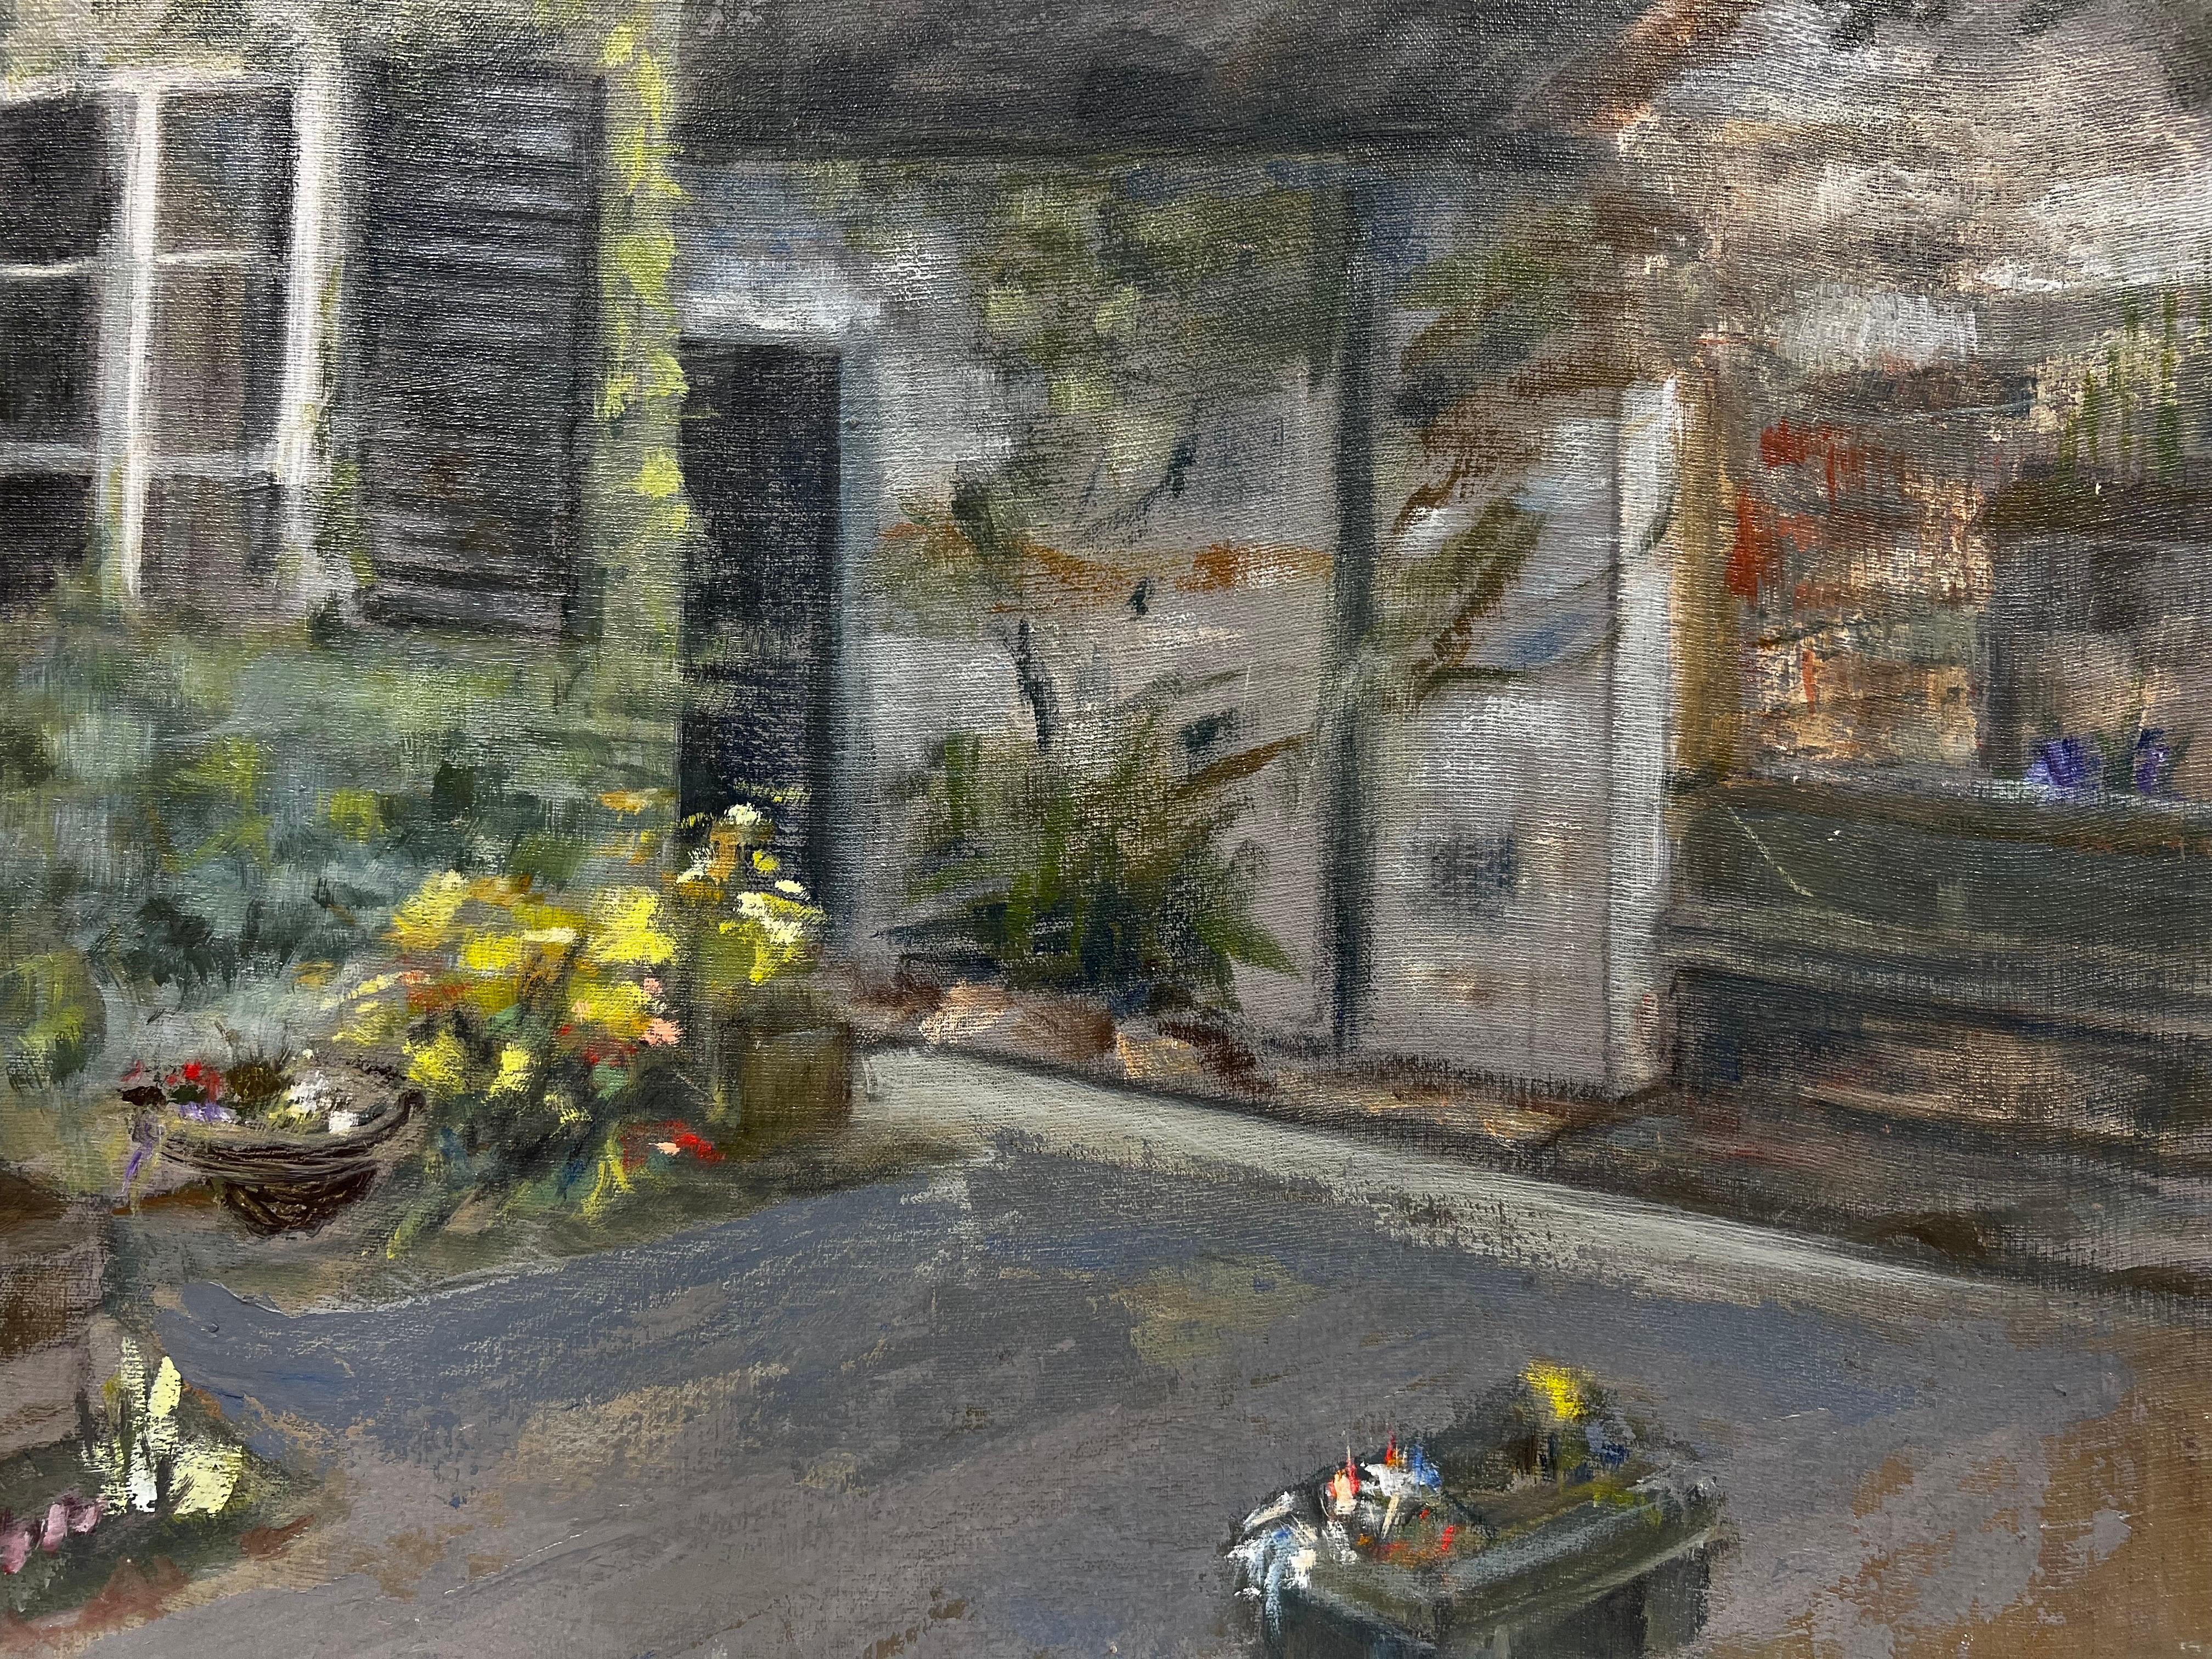 Artist/ School: Kathleen Crow (British, contemporary), signed with monogram

Title: Garden Patiio

Medium: oil on board, unframed 

Board: 18 x 24 inches

Provenance: private collection, England
Condition: The painting is in overall very good and